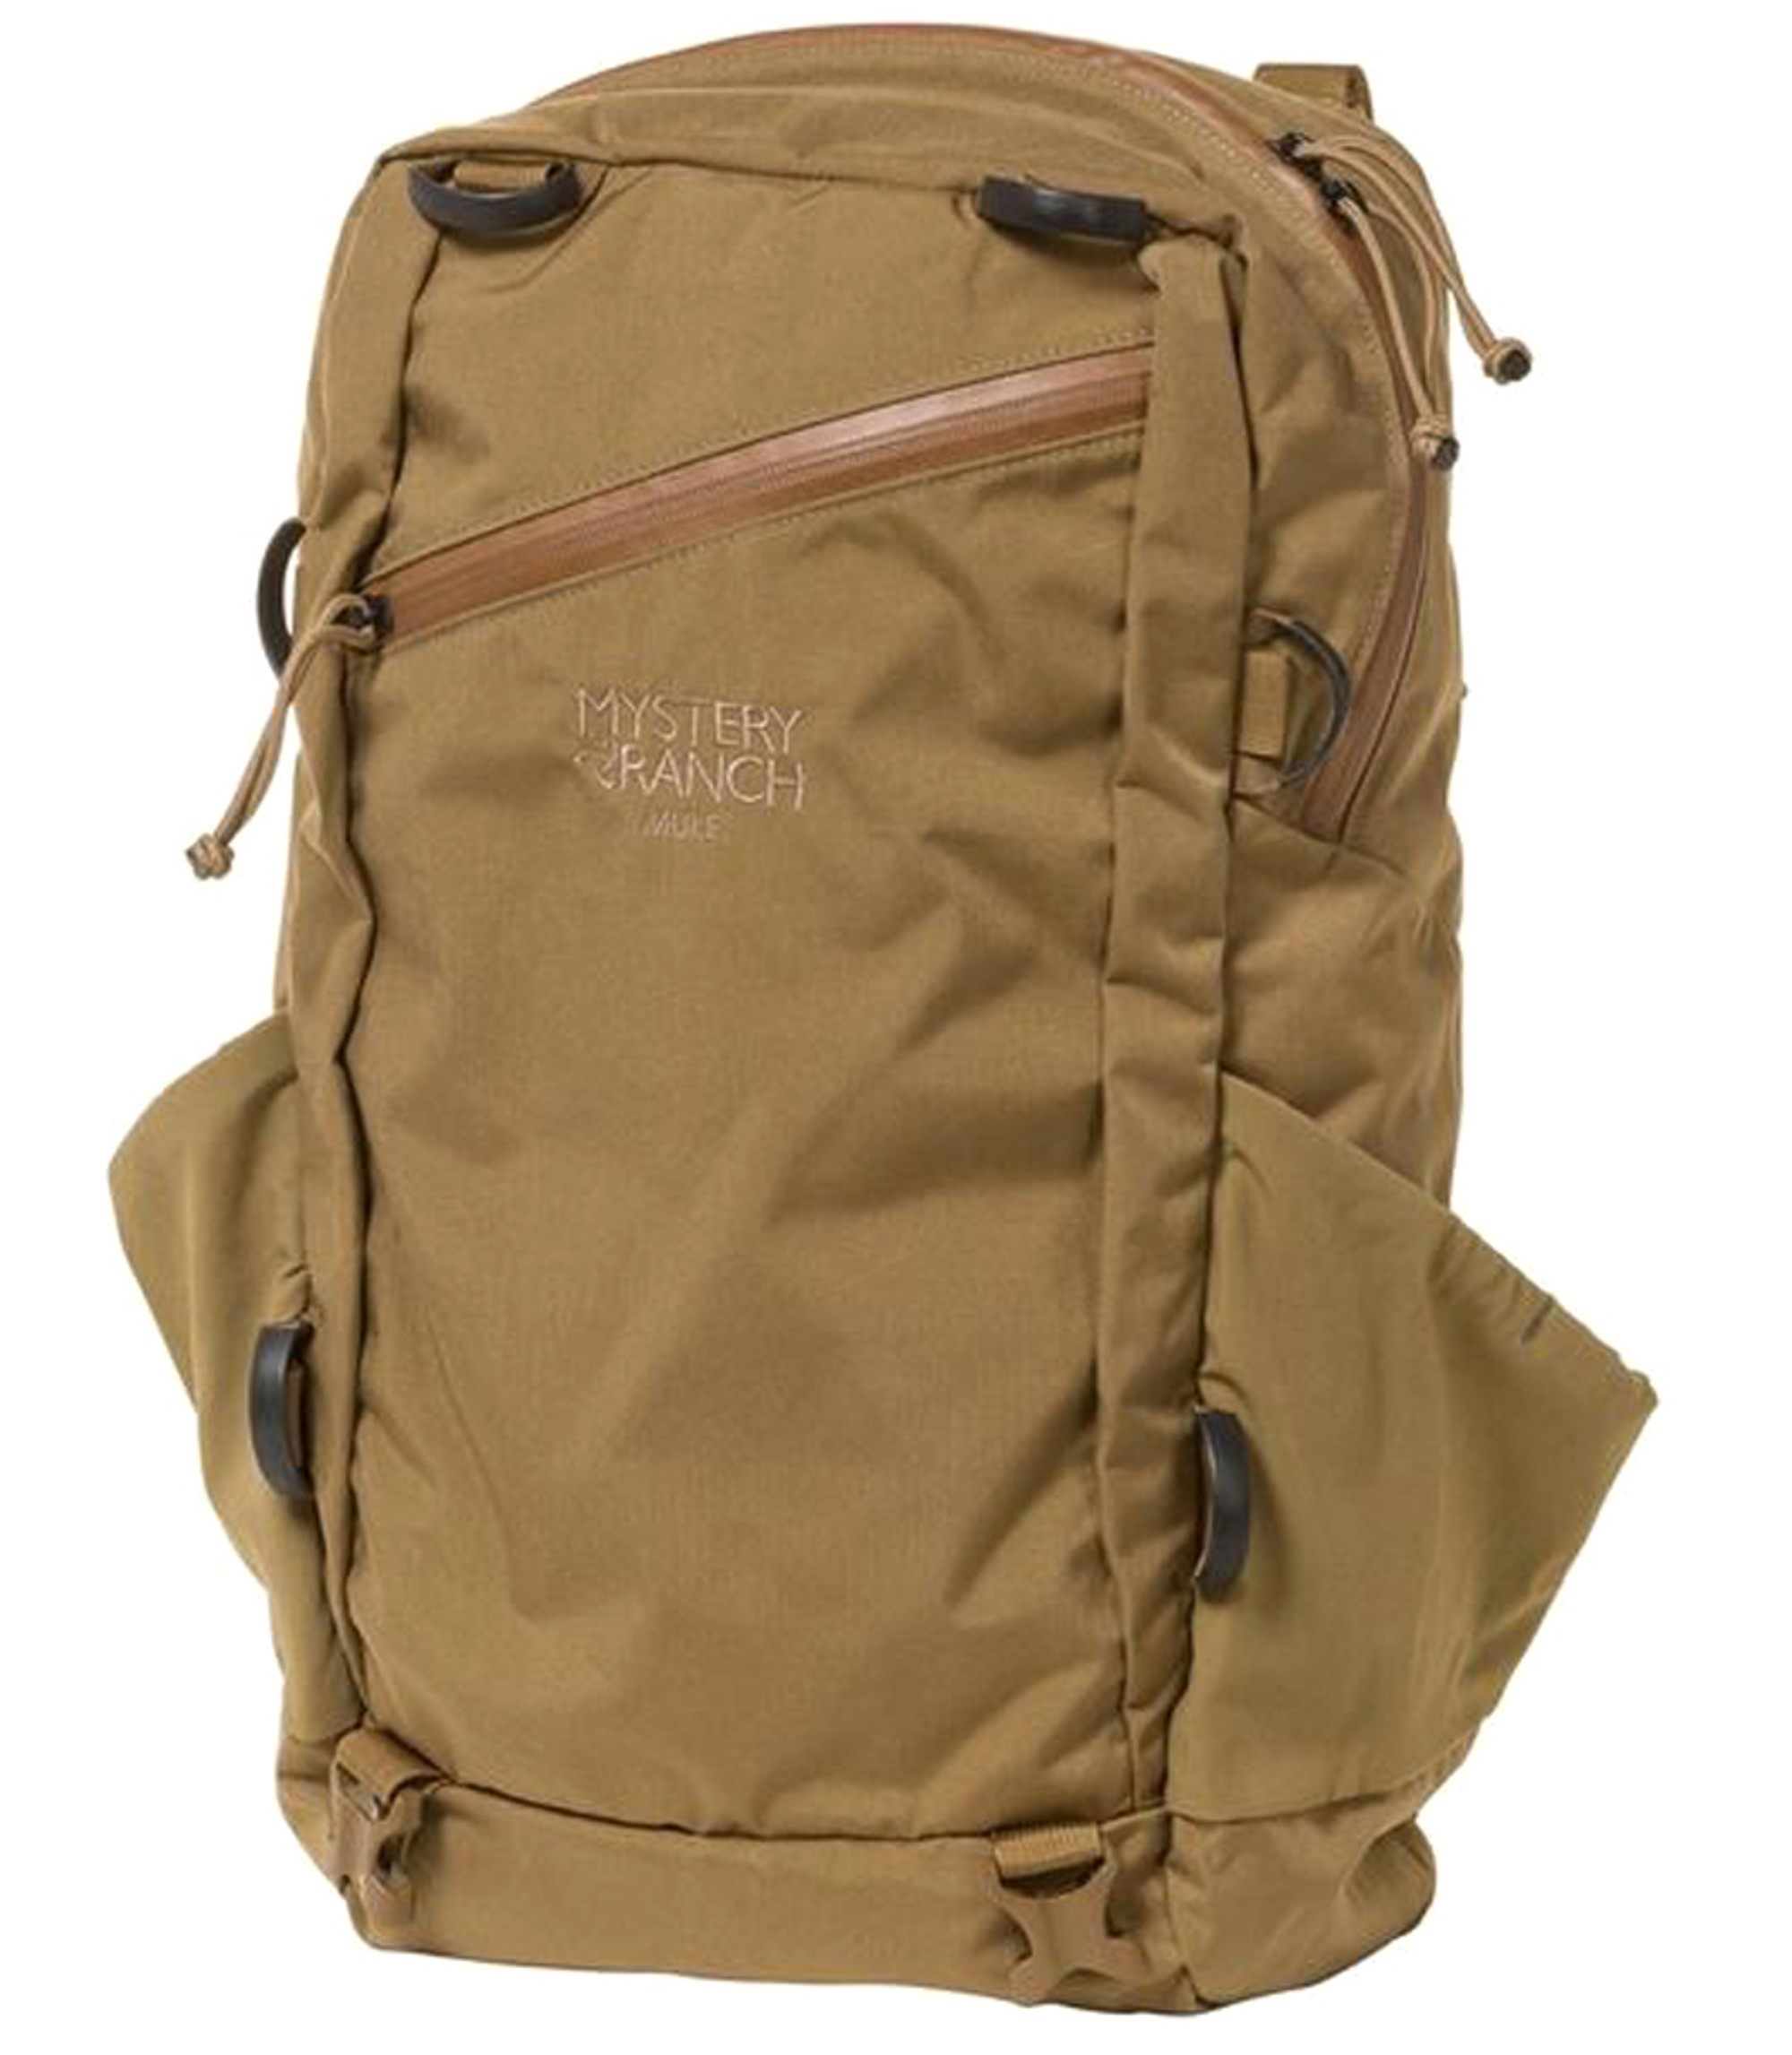 Mystery Ranch Mule 23L - Coyote